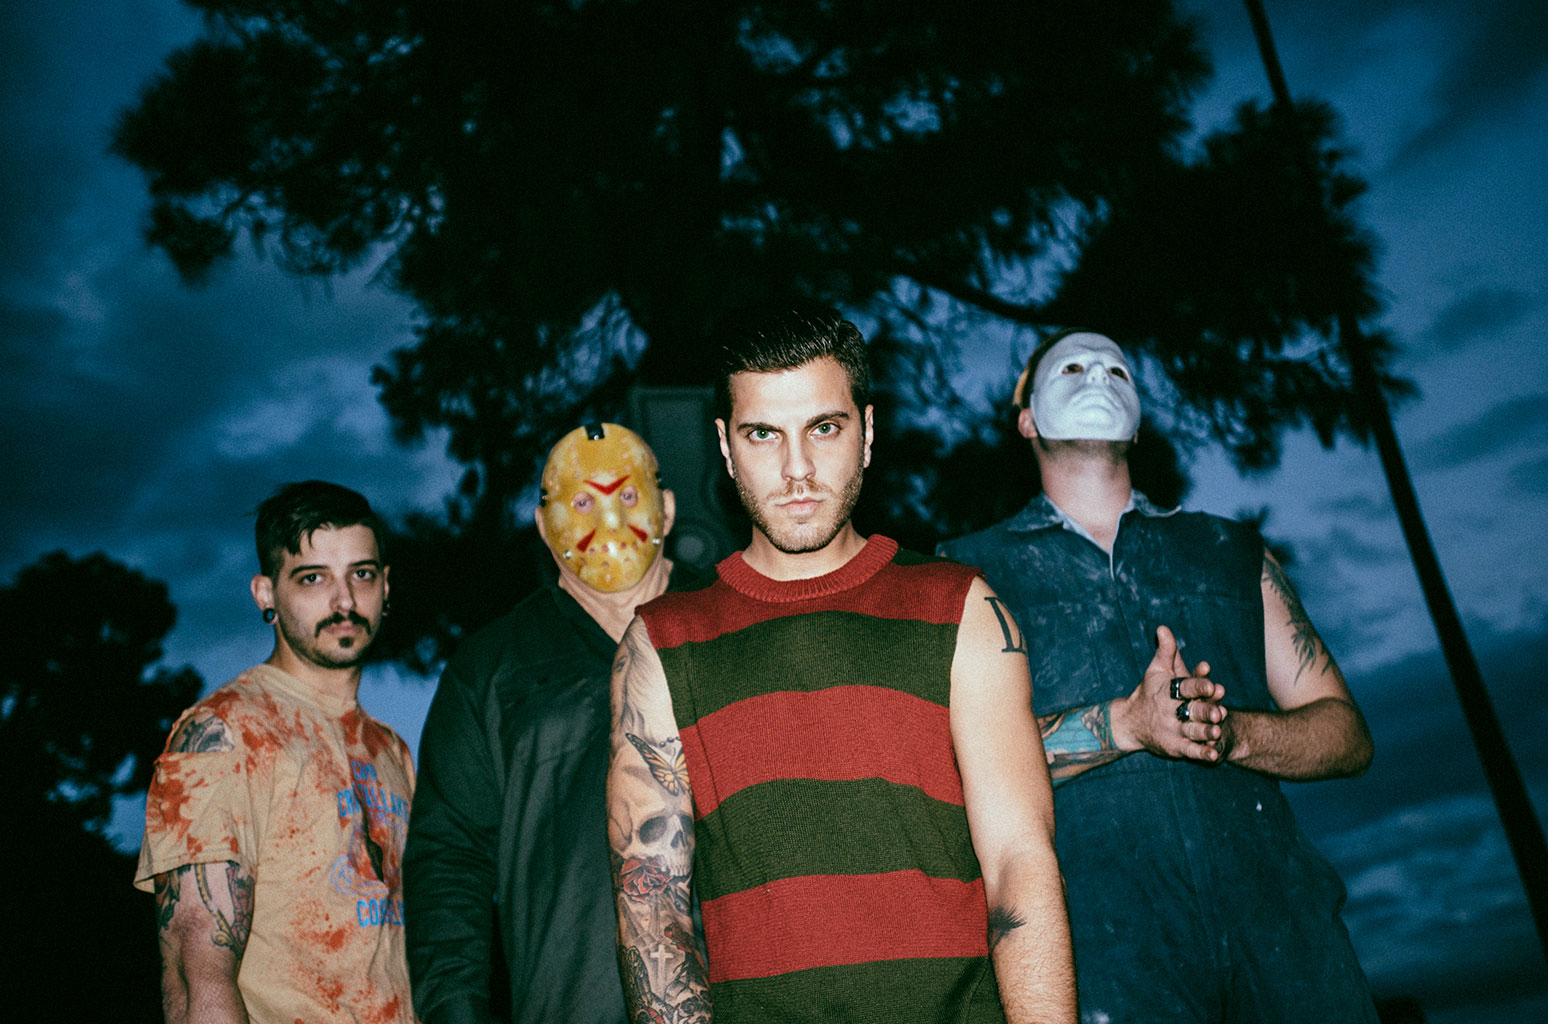 Ice Nine Kills drops live "It" themed music video for "It is the End